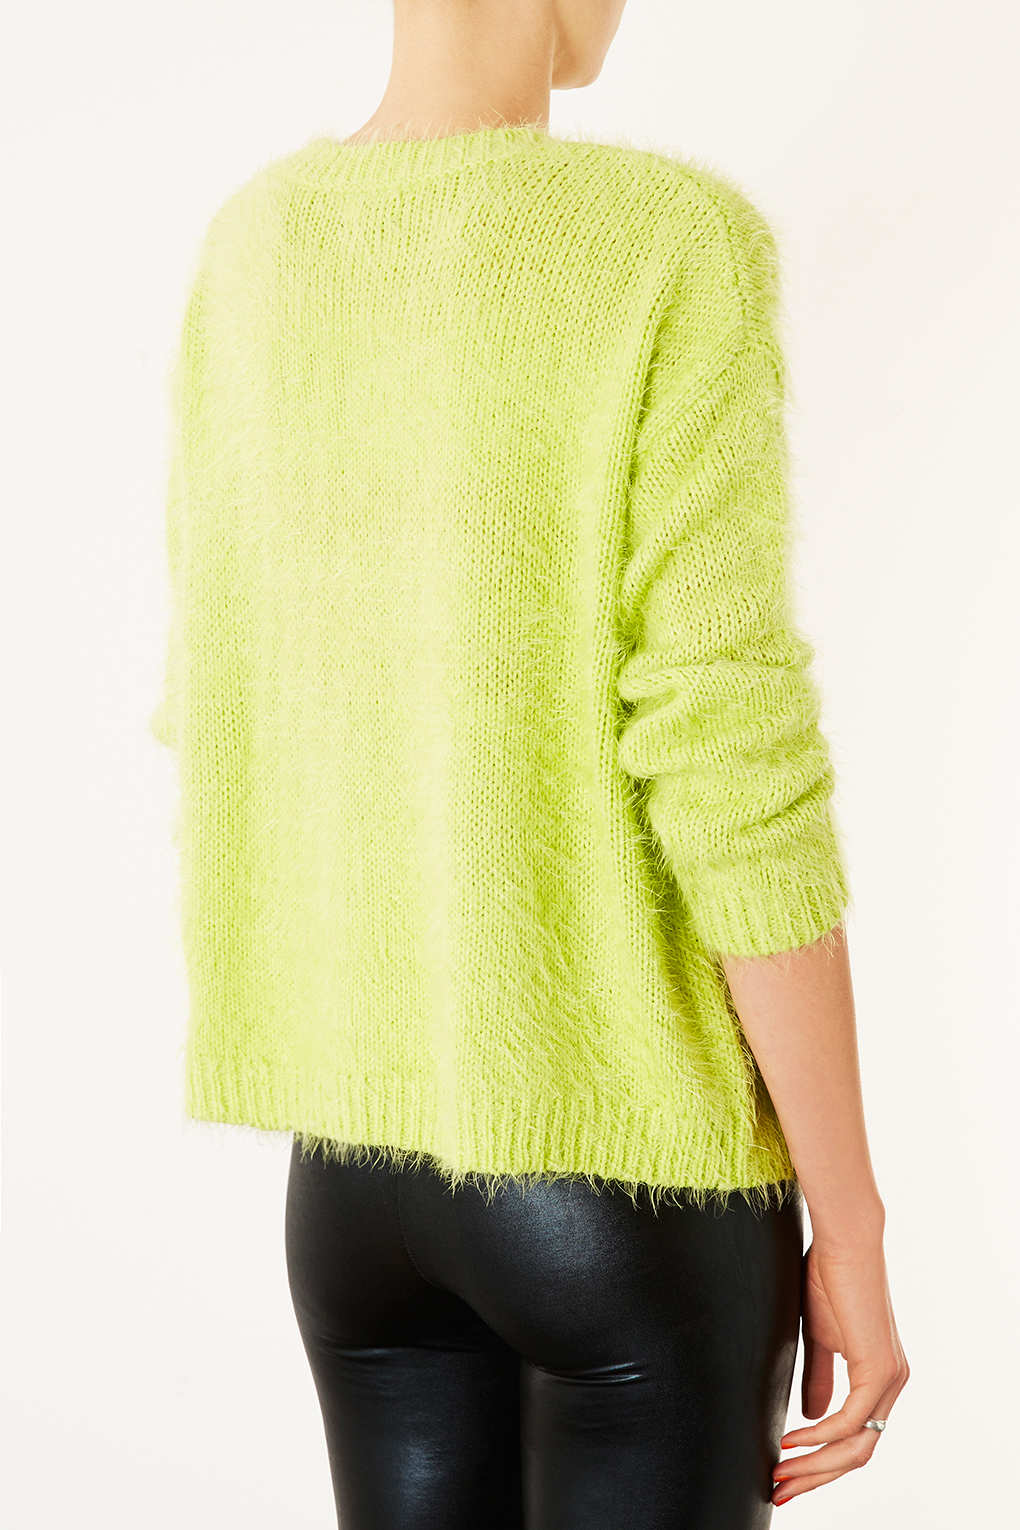 Lyst - Topshop Knitted Fluffy Star Jumper in Green